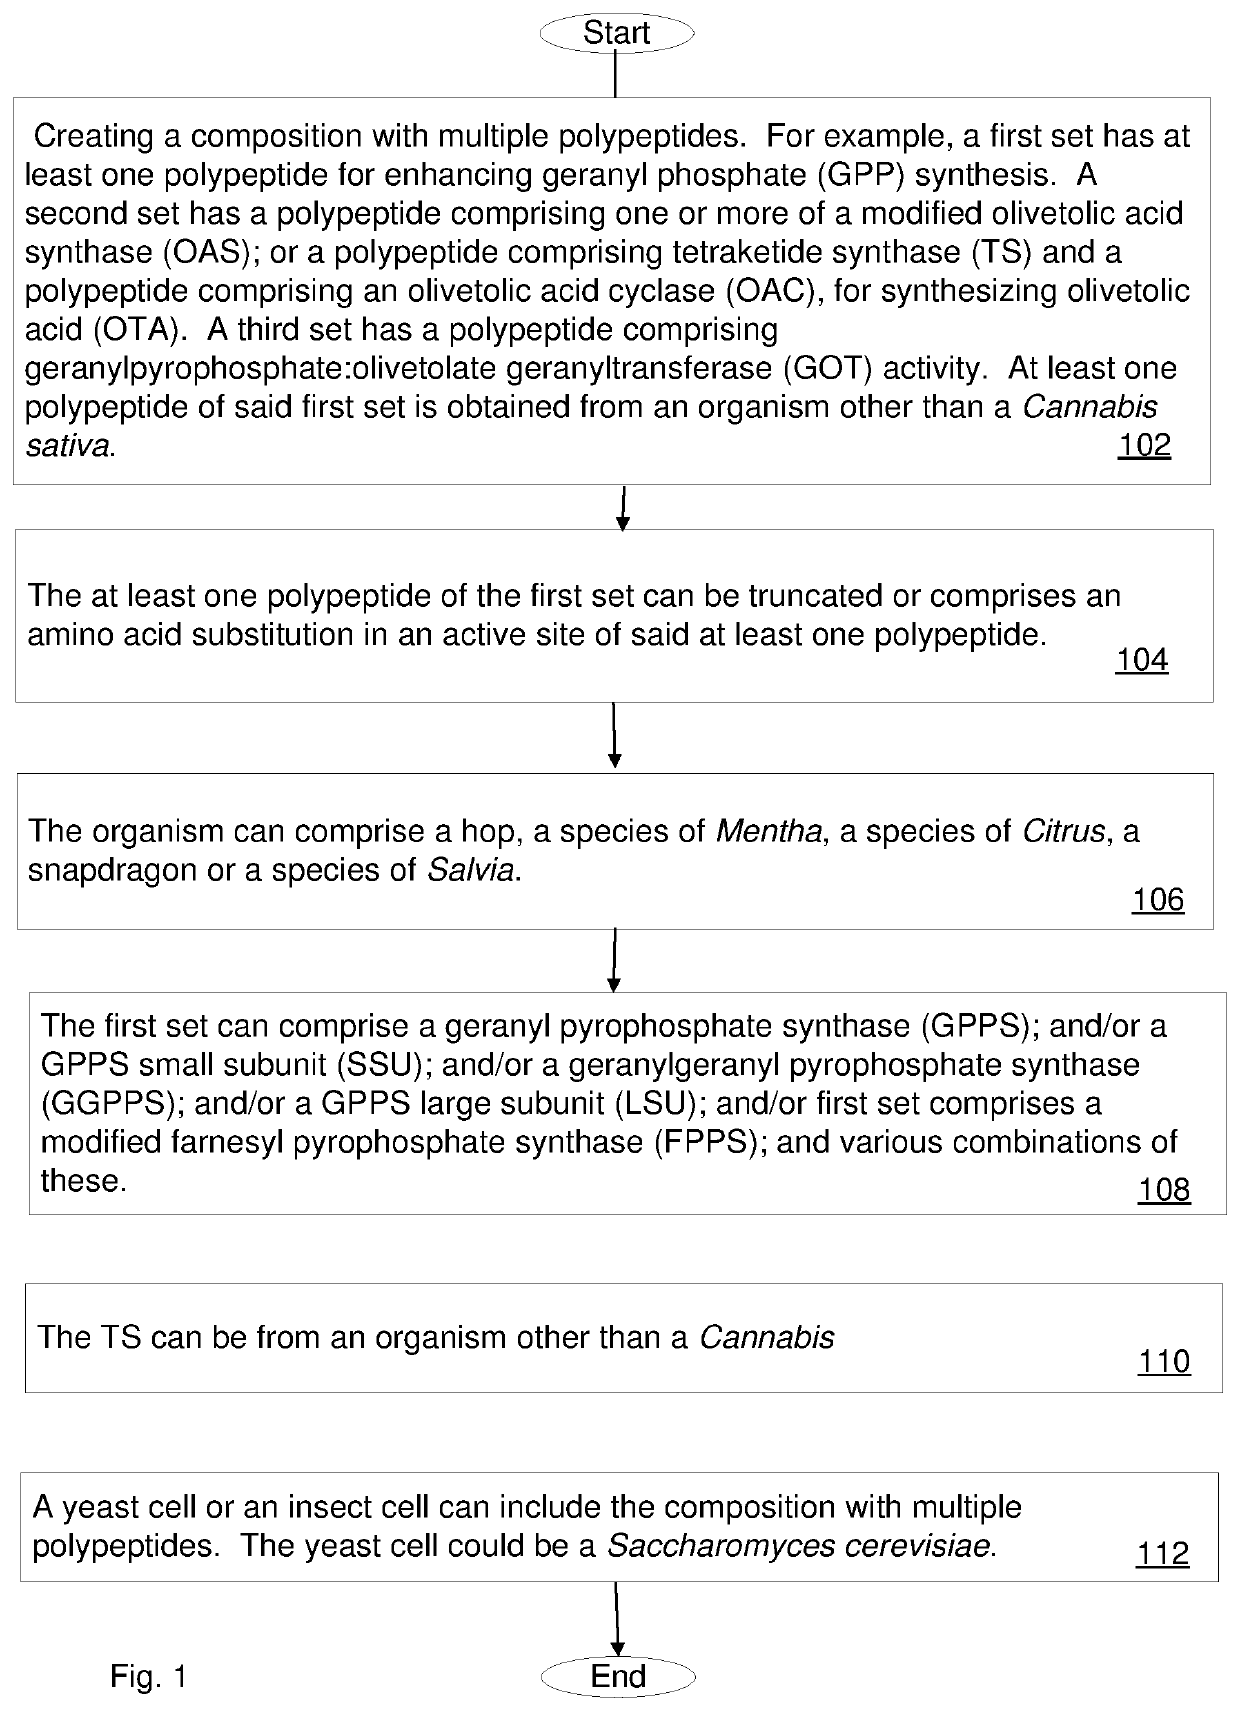 Cannabinoid Production by Synthetic In Vivo Means